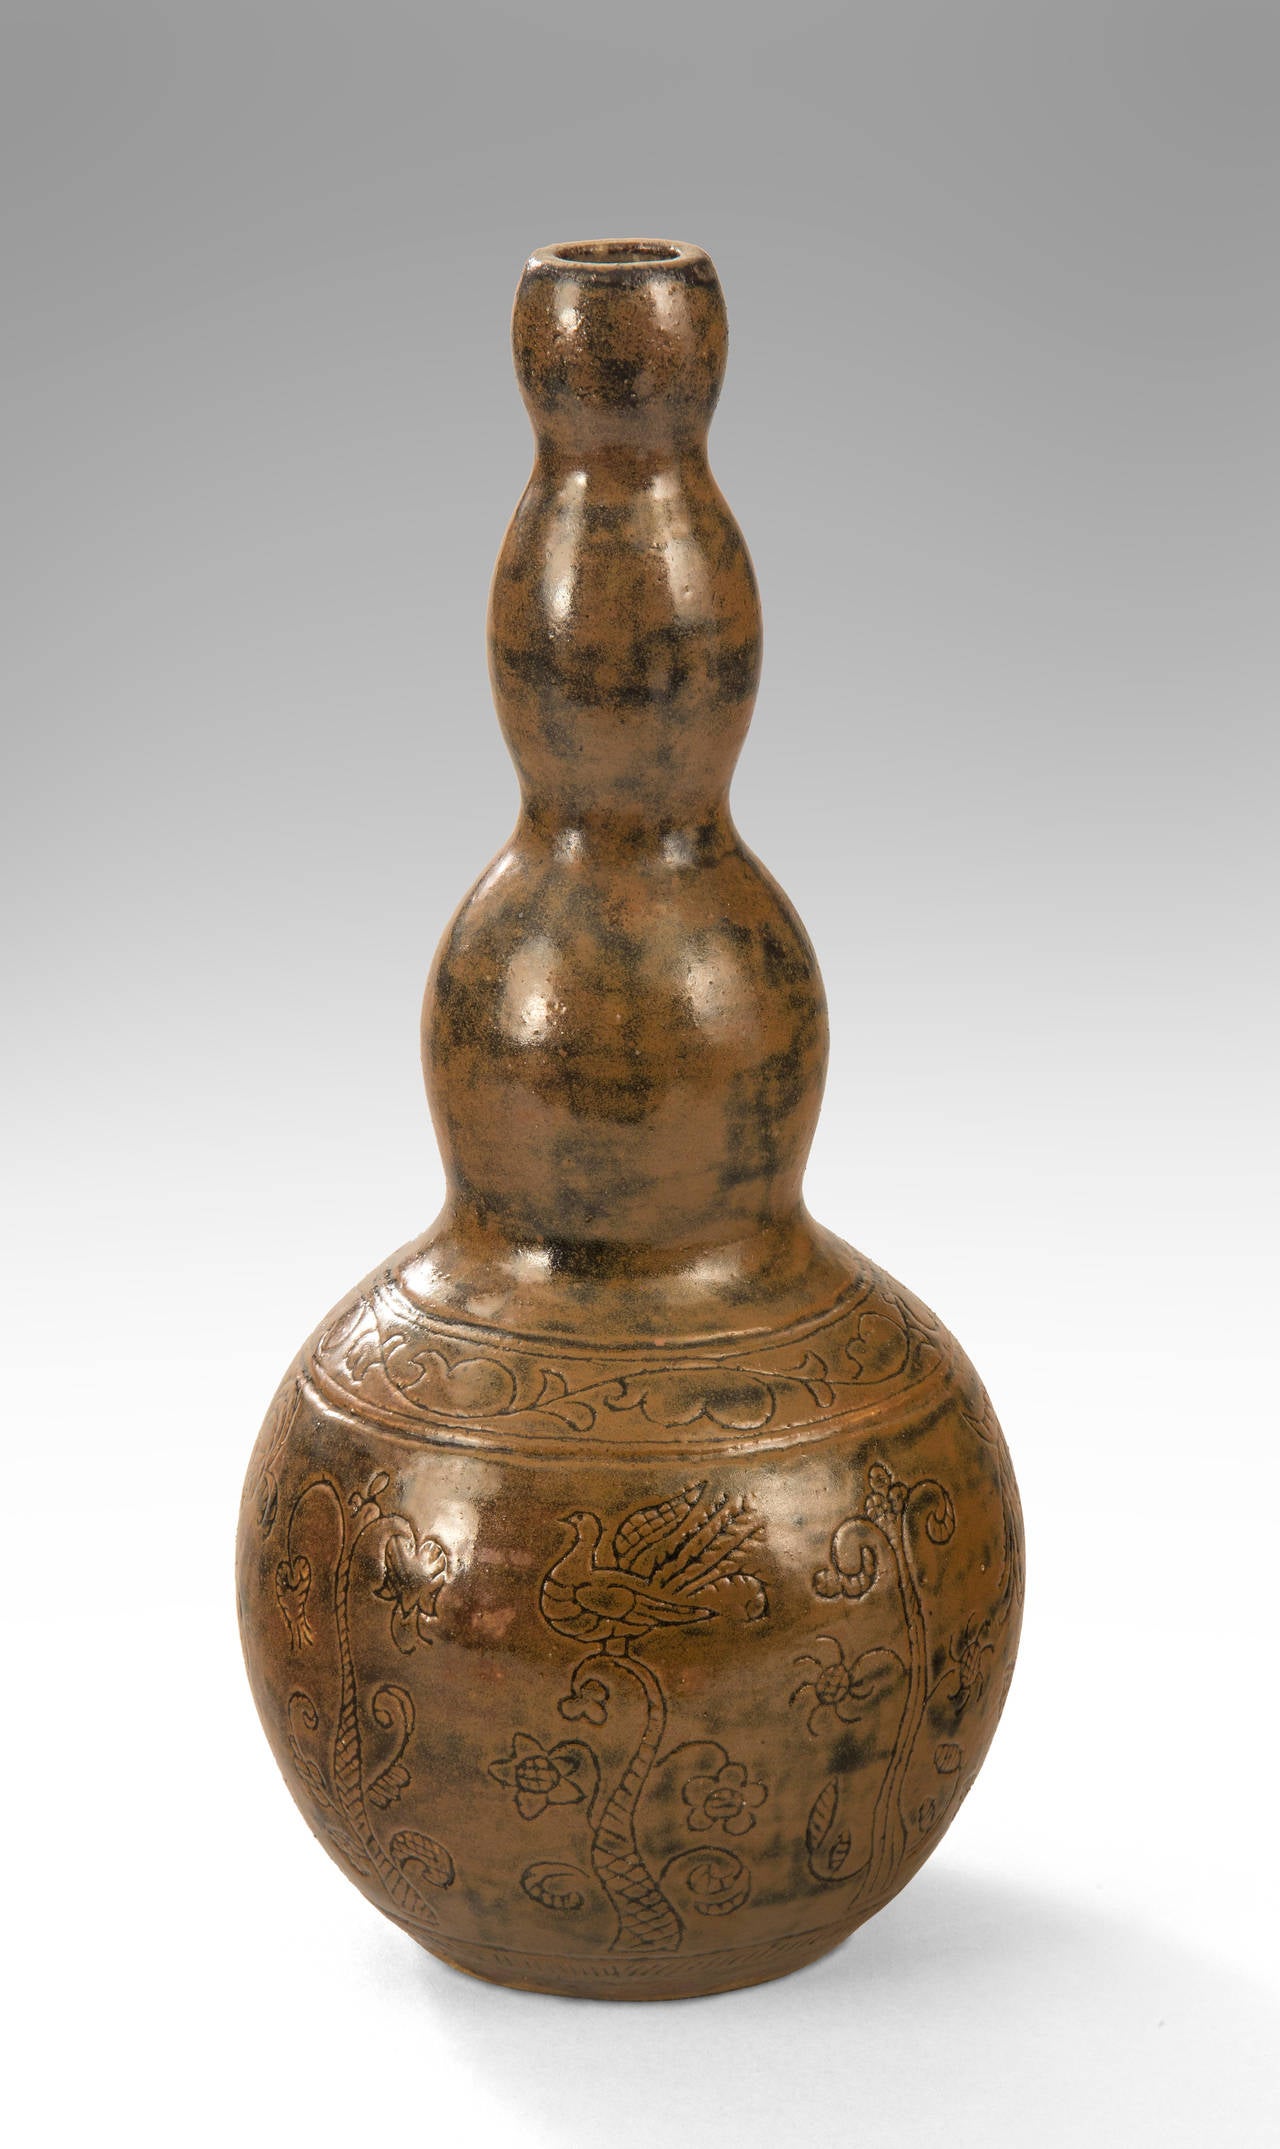 The quadruple gourd form, incised with reliefs depicting flowers and a bird, terminating in a circular base, glazed throughout with rich browns and charcoal.

Seraphin Soudbinine, sculptor, painter and ceramicist born in Russia, worked much of life